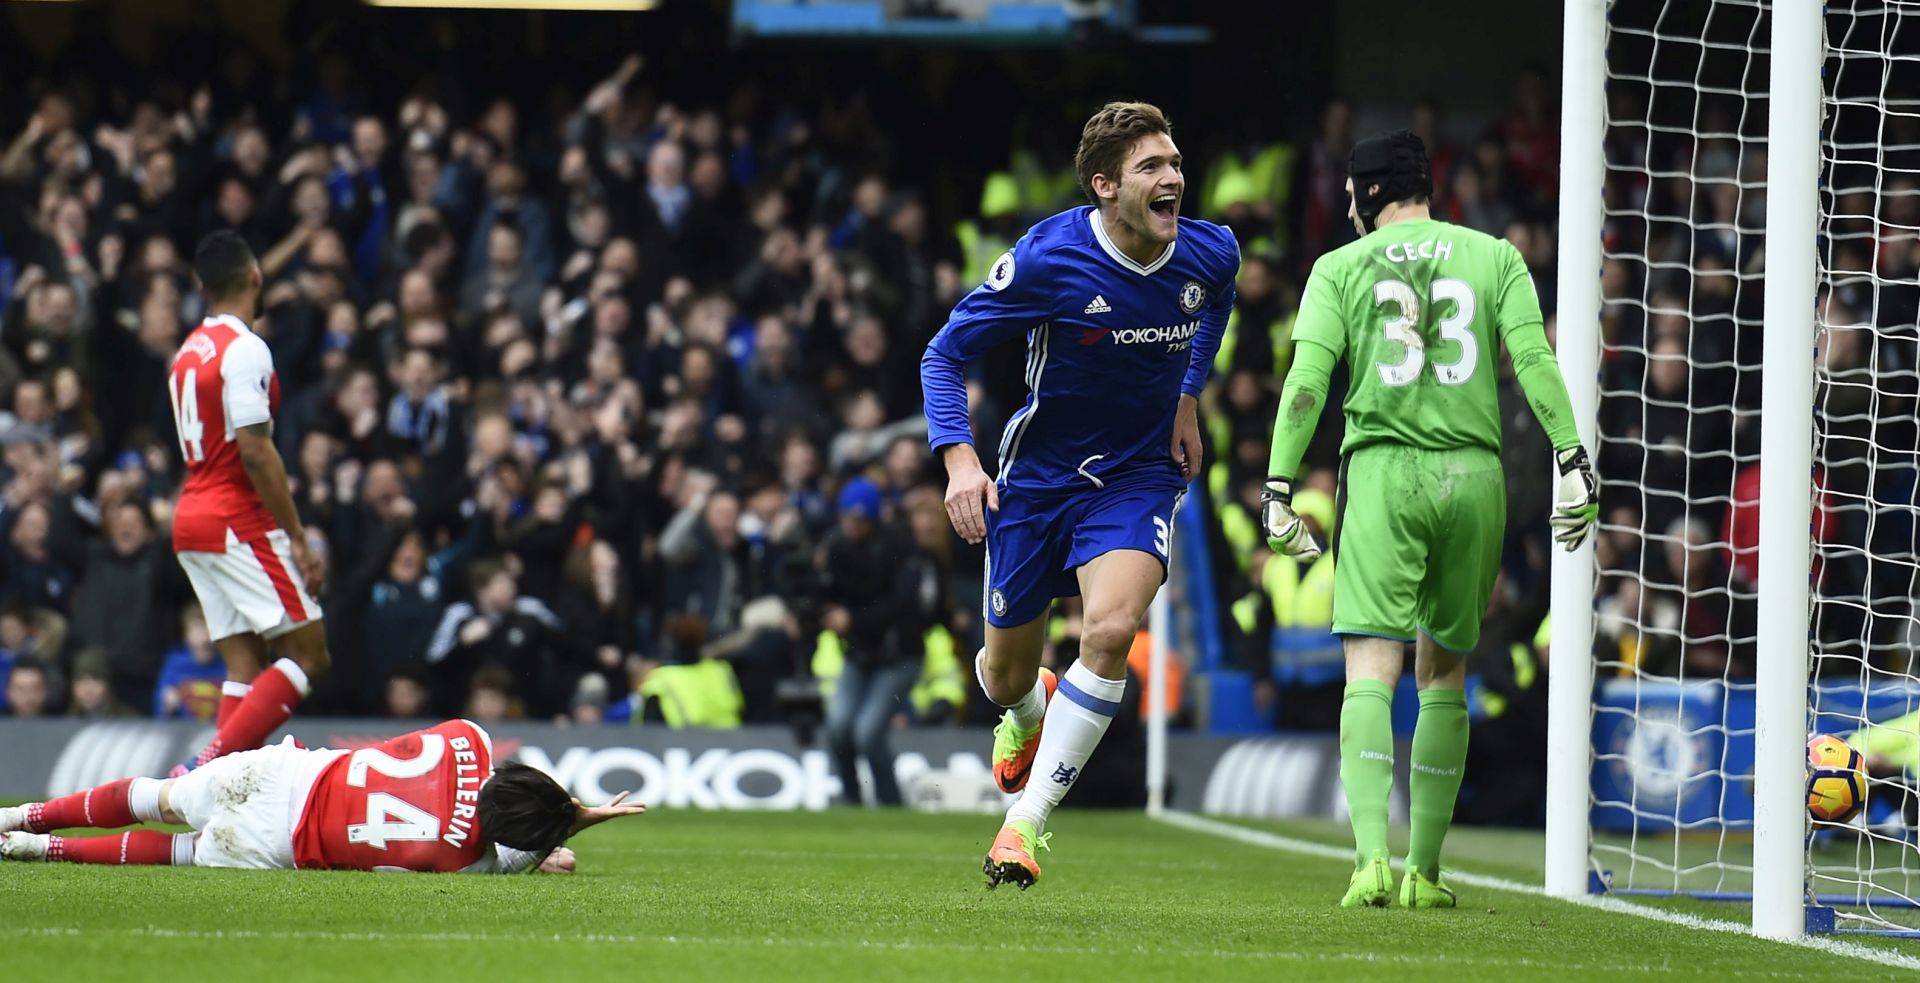 epa05770333 Chelsea's Marcos Alonso celebrates after scoring against Arsenal during their English Premier League soccer match at Stamford Bridge, London, Britain, 4 February 2017.  EPA/WILL OLIVER EDITORIAL USE ONLY. No use with unauthorized audio, video, data, fixture lists, club/league logos or 'live' services. Online in-match use limited to 75 images, no video emulation. No use in betting, games or single club/league/player publications.